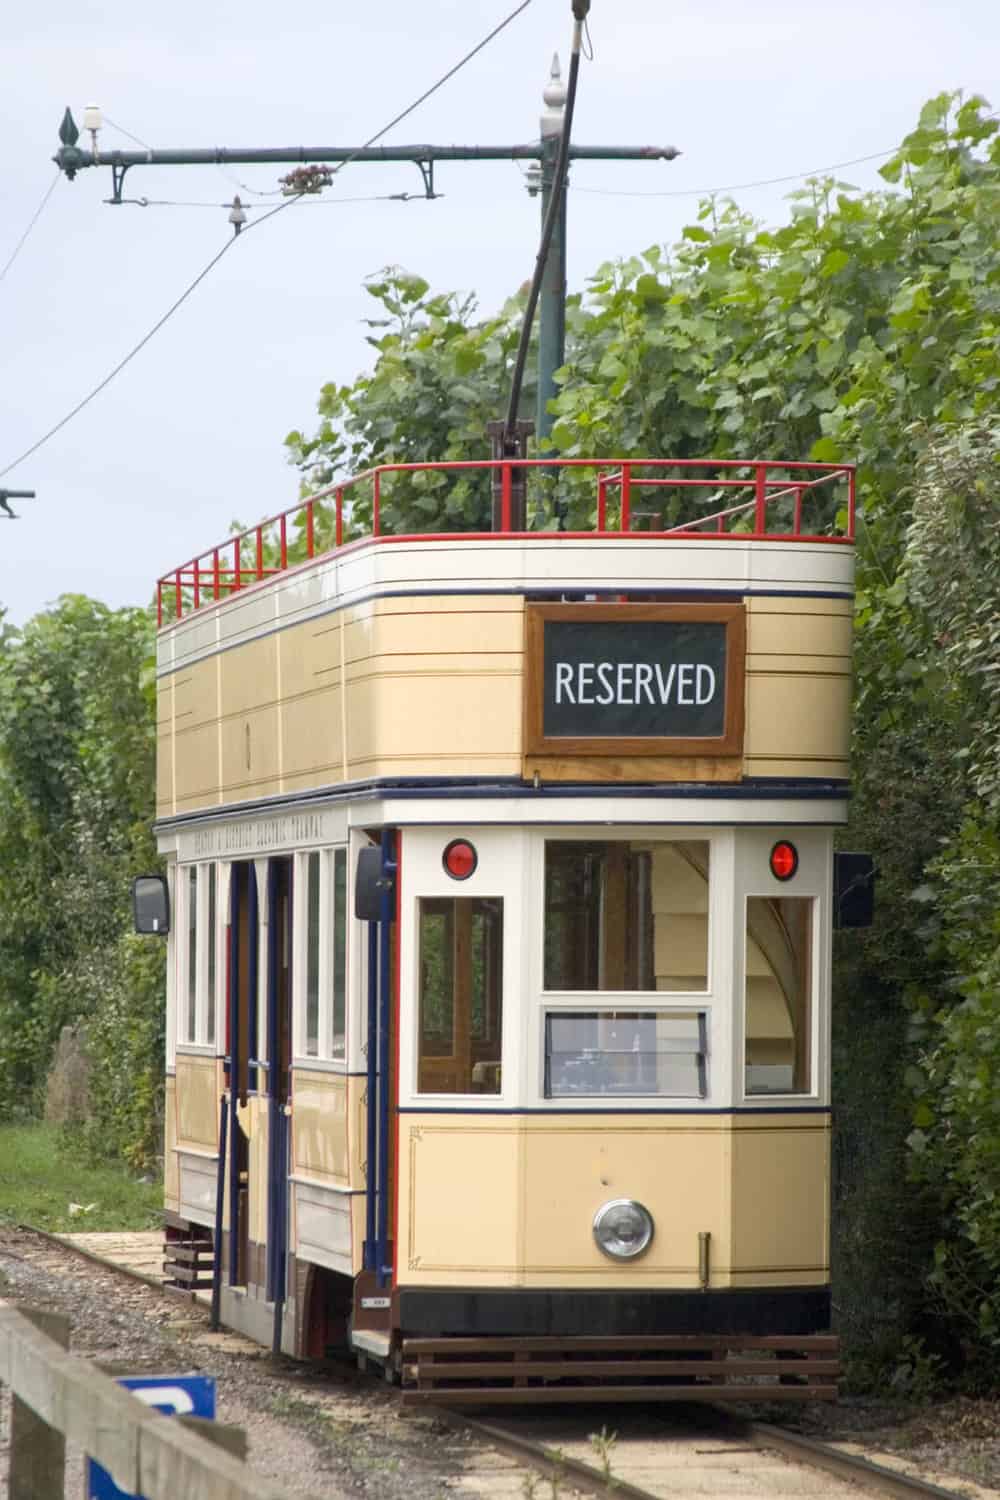 One of the open top double decker trams